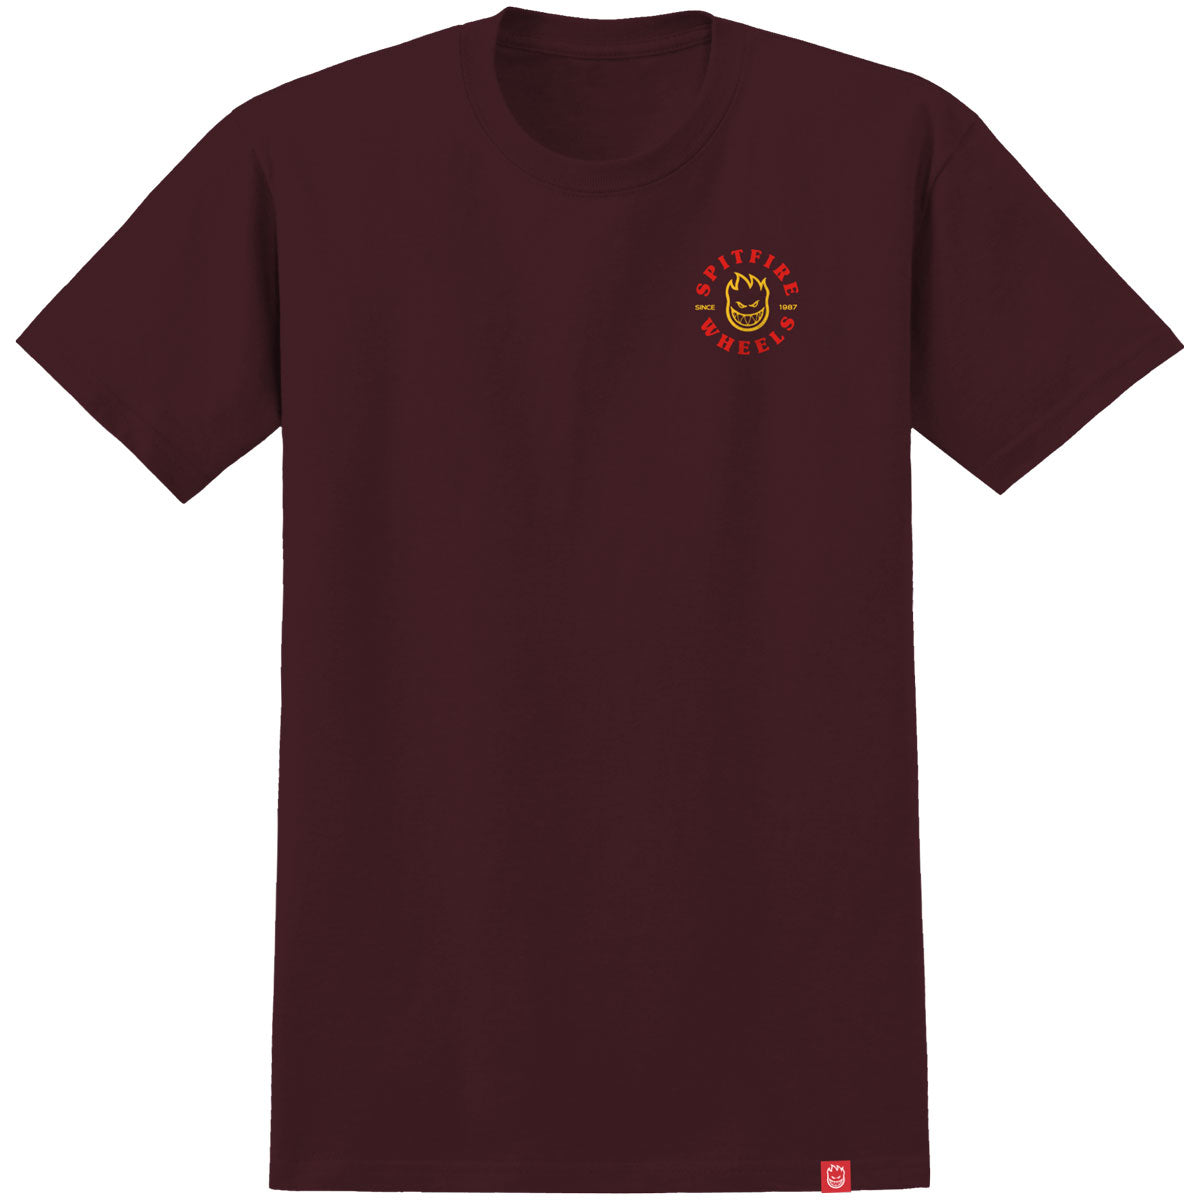 Spitfire Bighead Classic T-Shirt - Maroon/Red/Yellow image 2